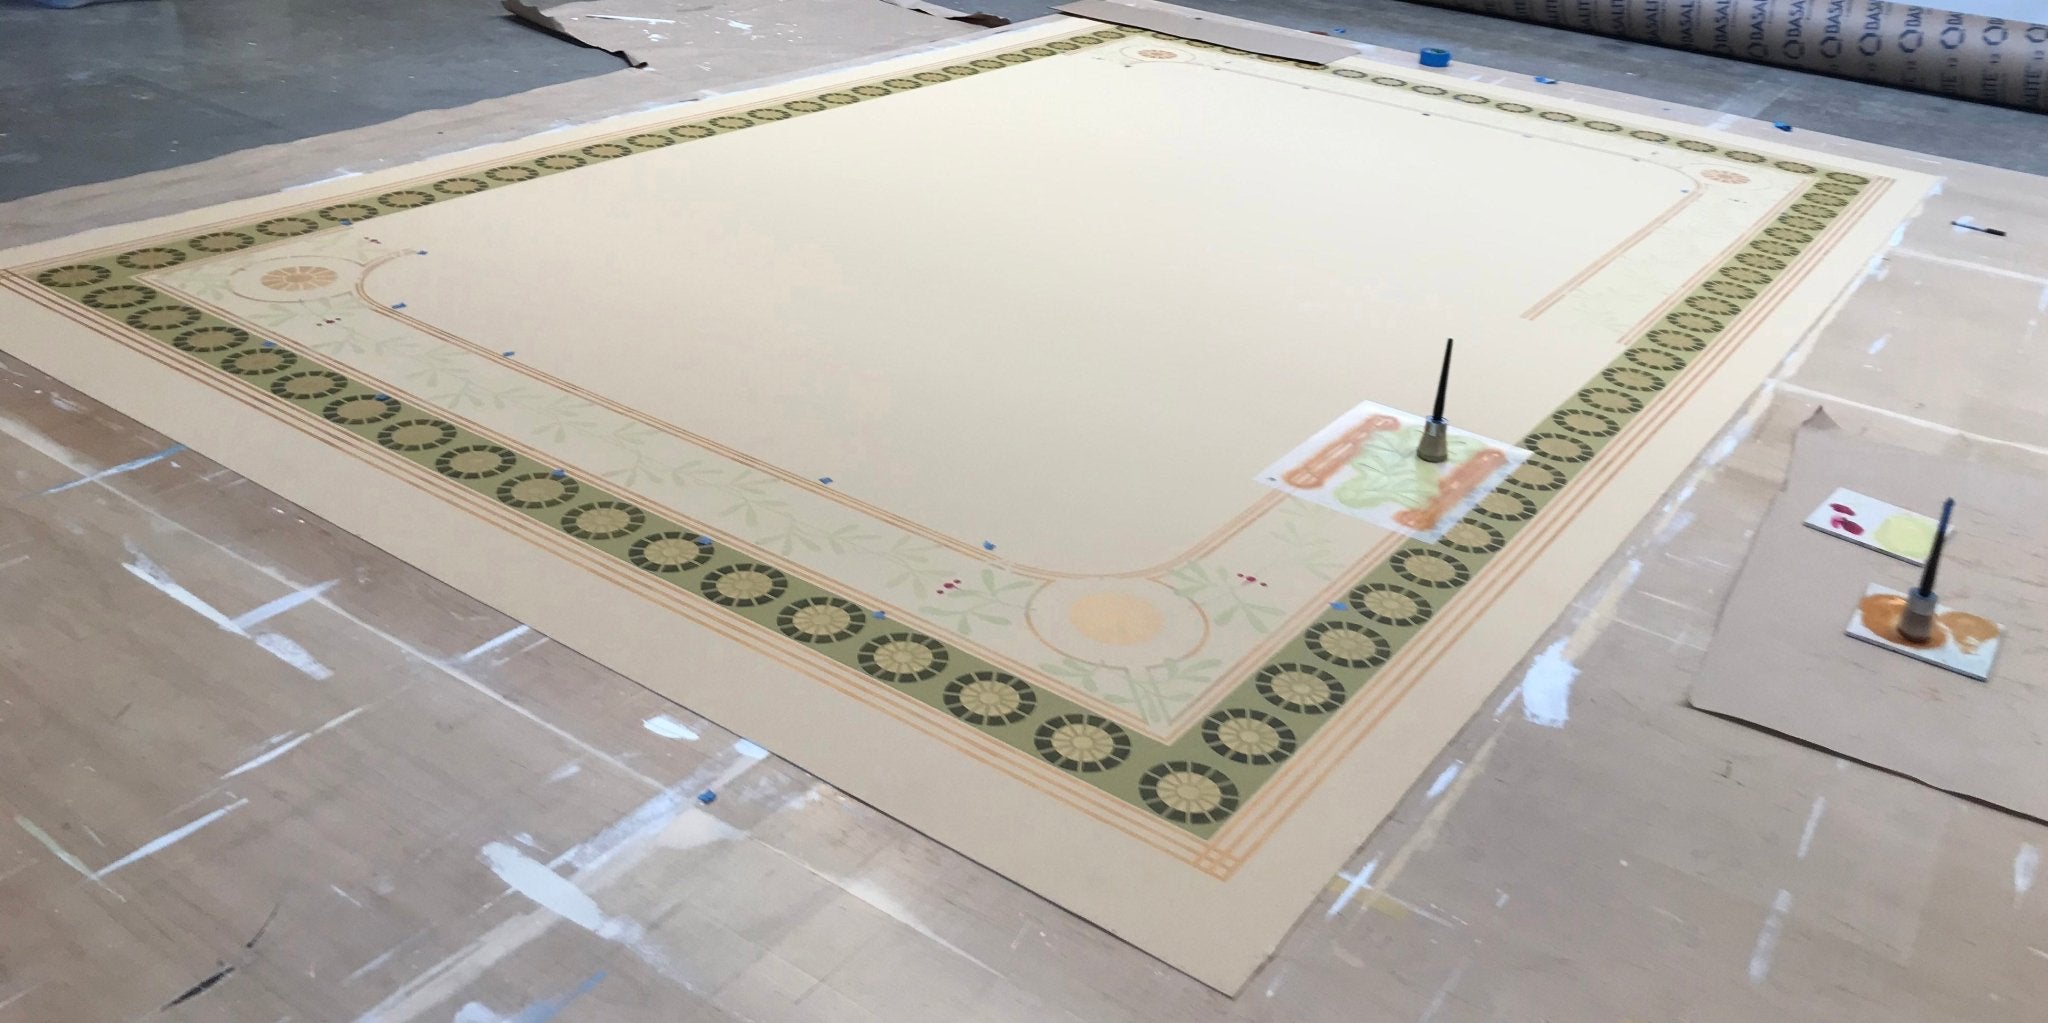 Production photo #3, showing the partially stenciled border design.